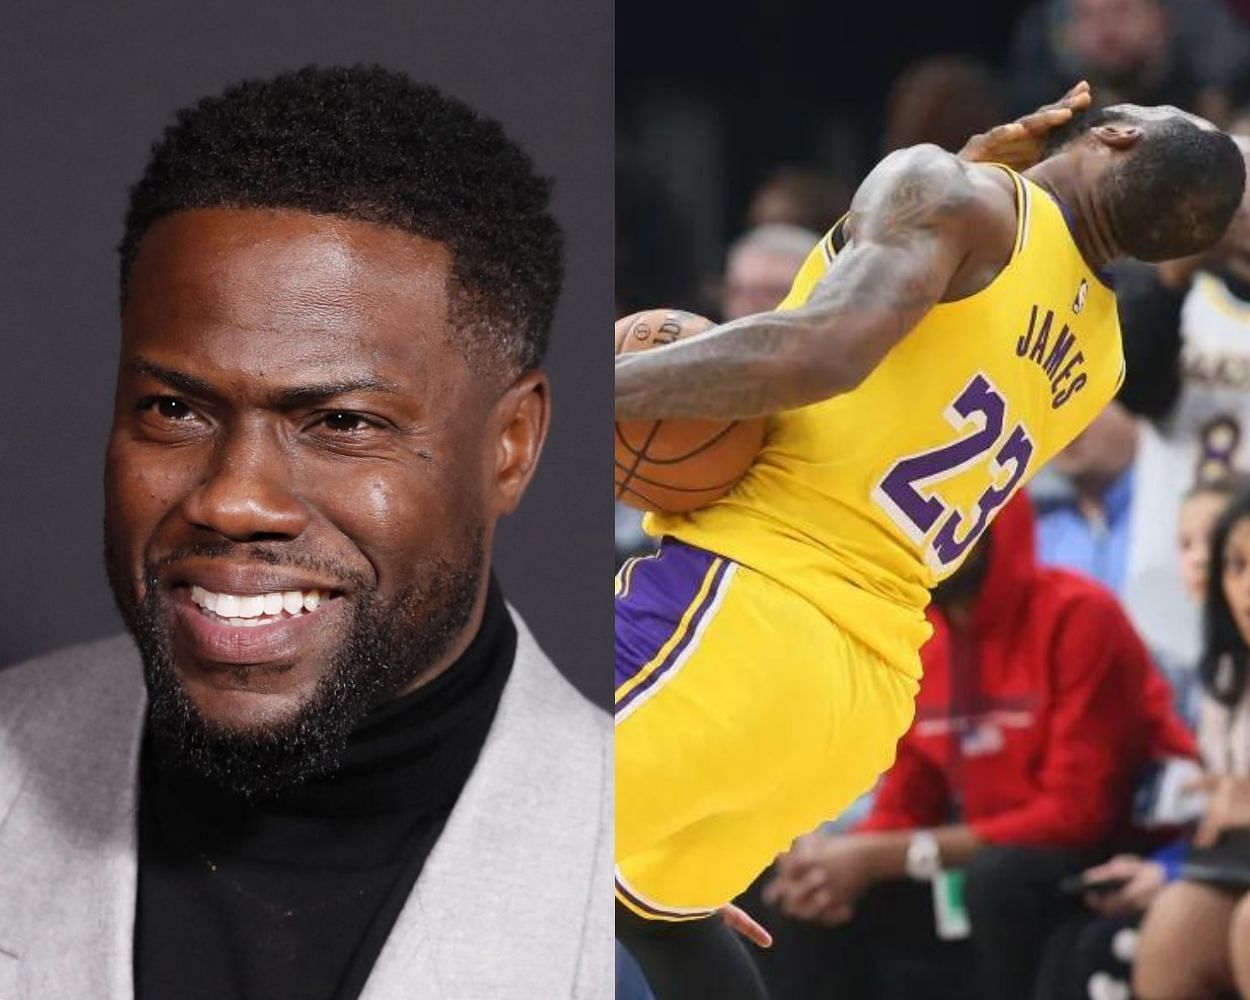 Kevin Hart calls out LeBron James for flopping